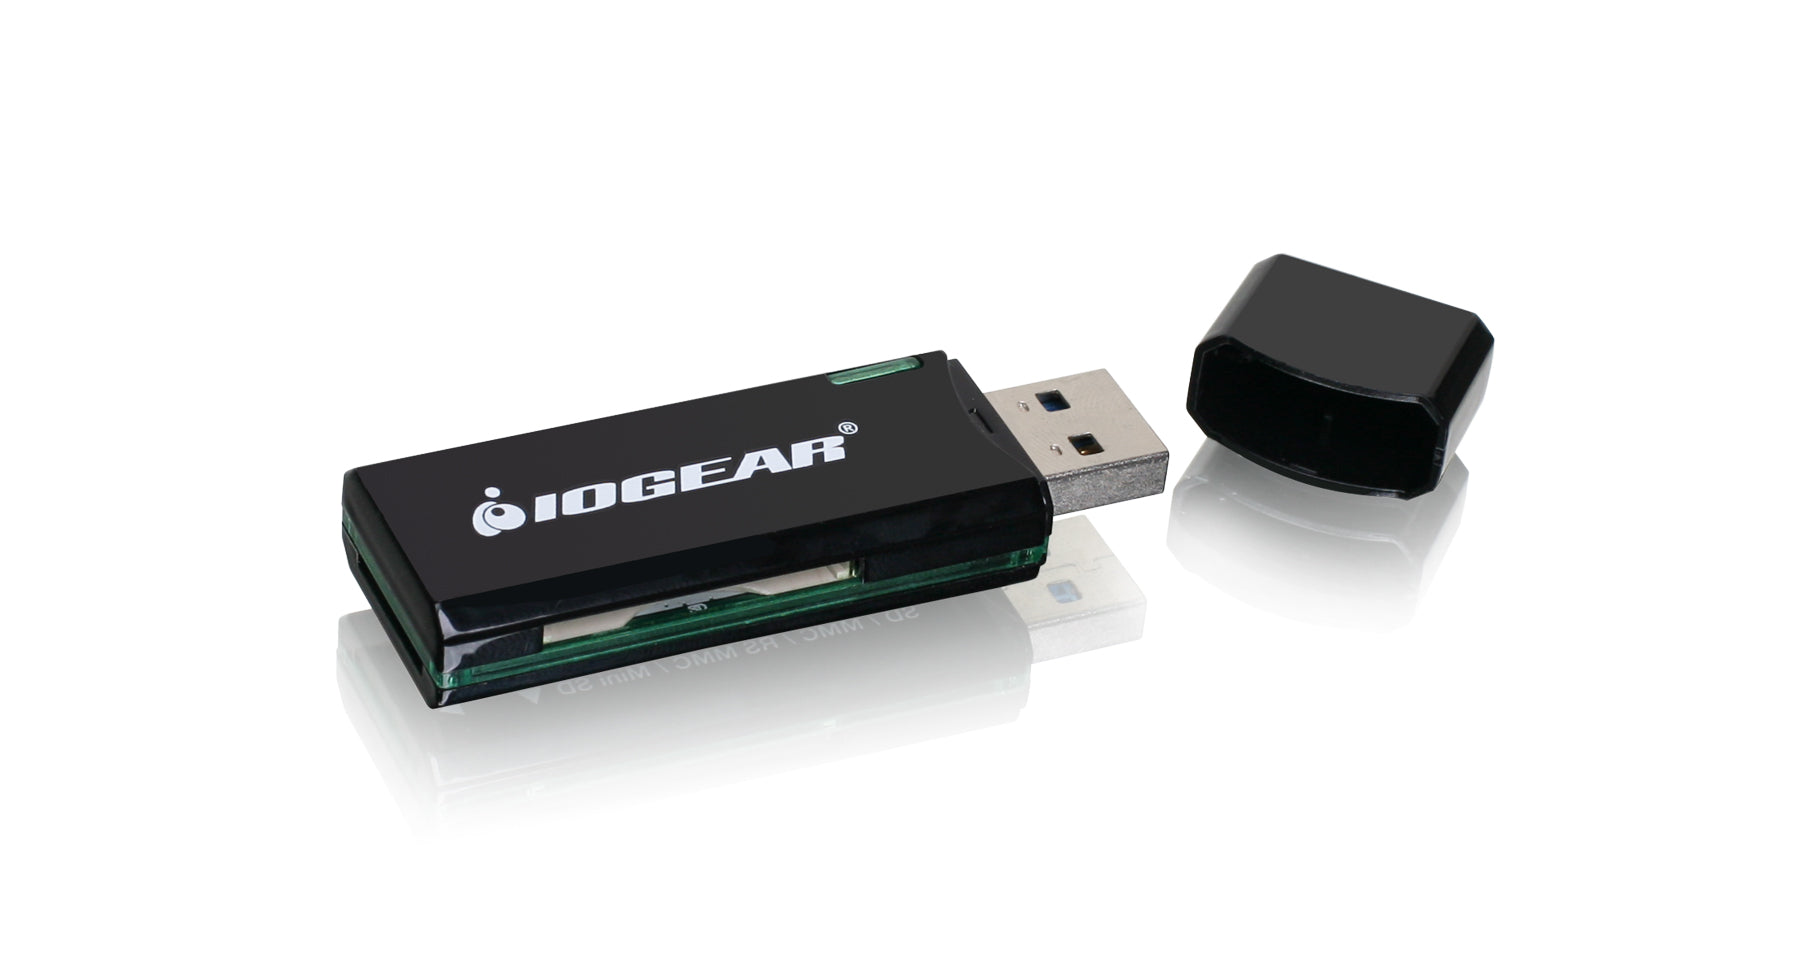 SuperSpeed USB 3.0 SD/Micro SD Card Reader / Writer